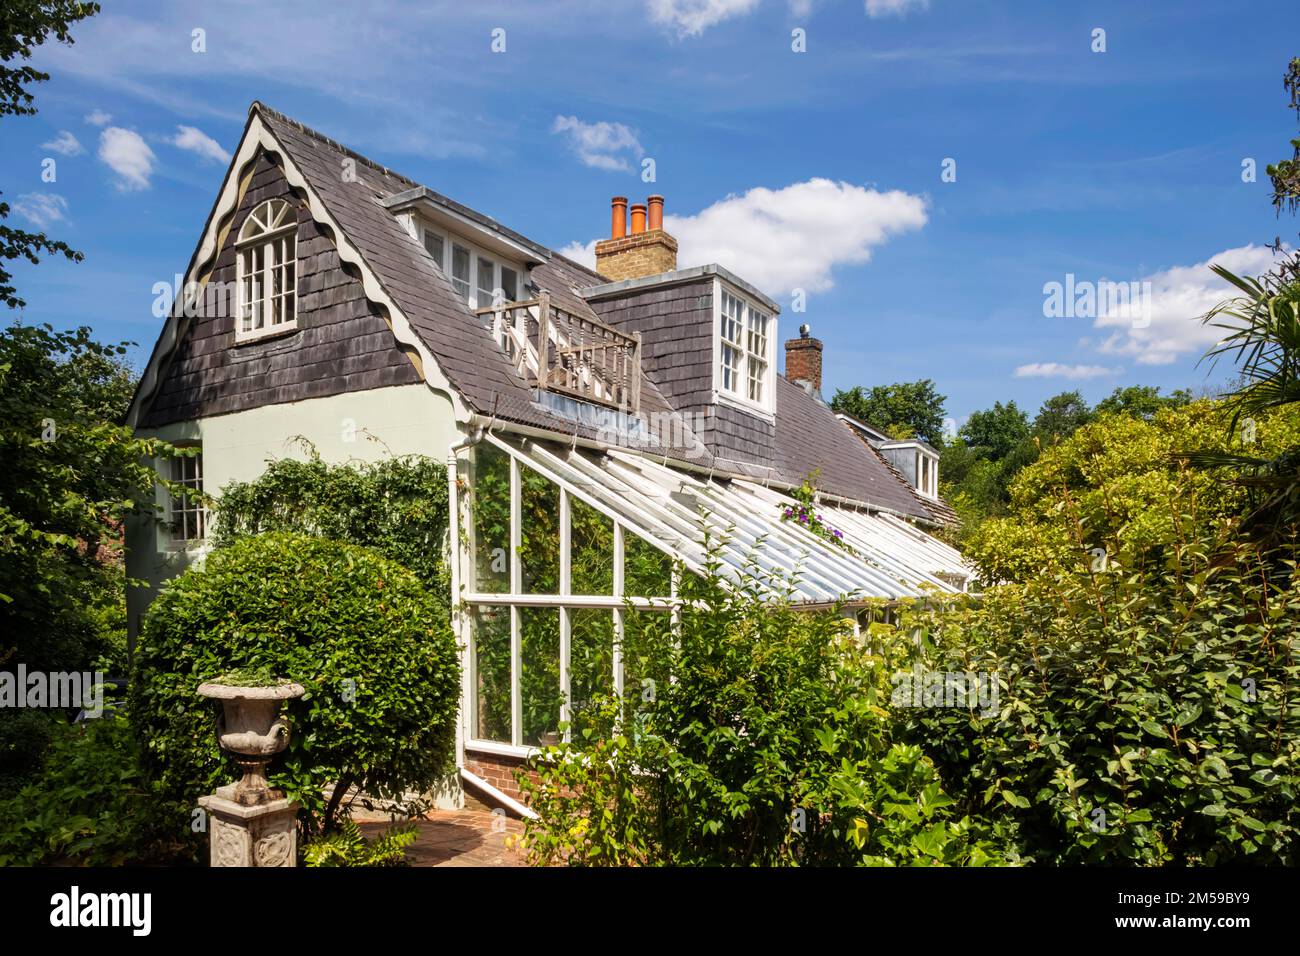 England, East Sussex, Lewes, Rodmell Village, Monk's House the Former Home of Virginia Woolf and her Husband Leonard Woolf *** Local Caption ***  UK,U Stock Photo